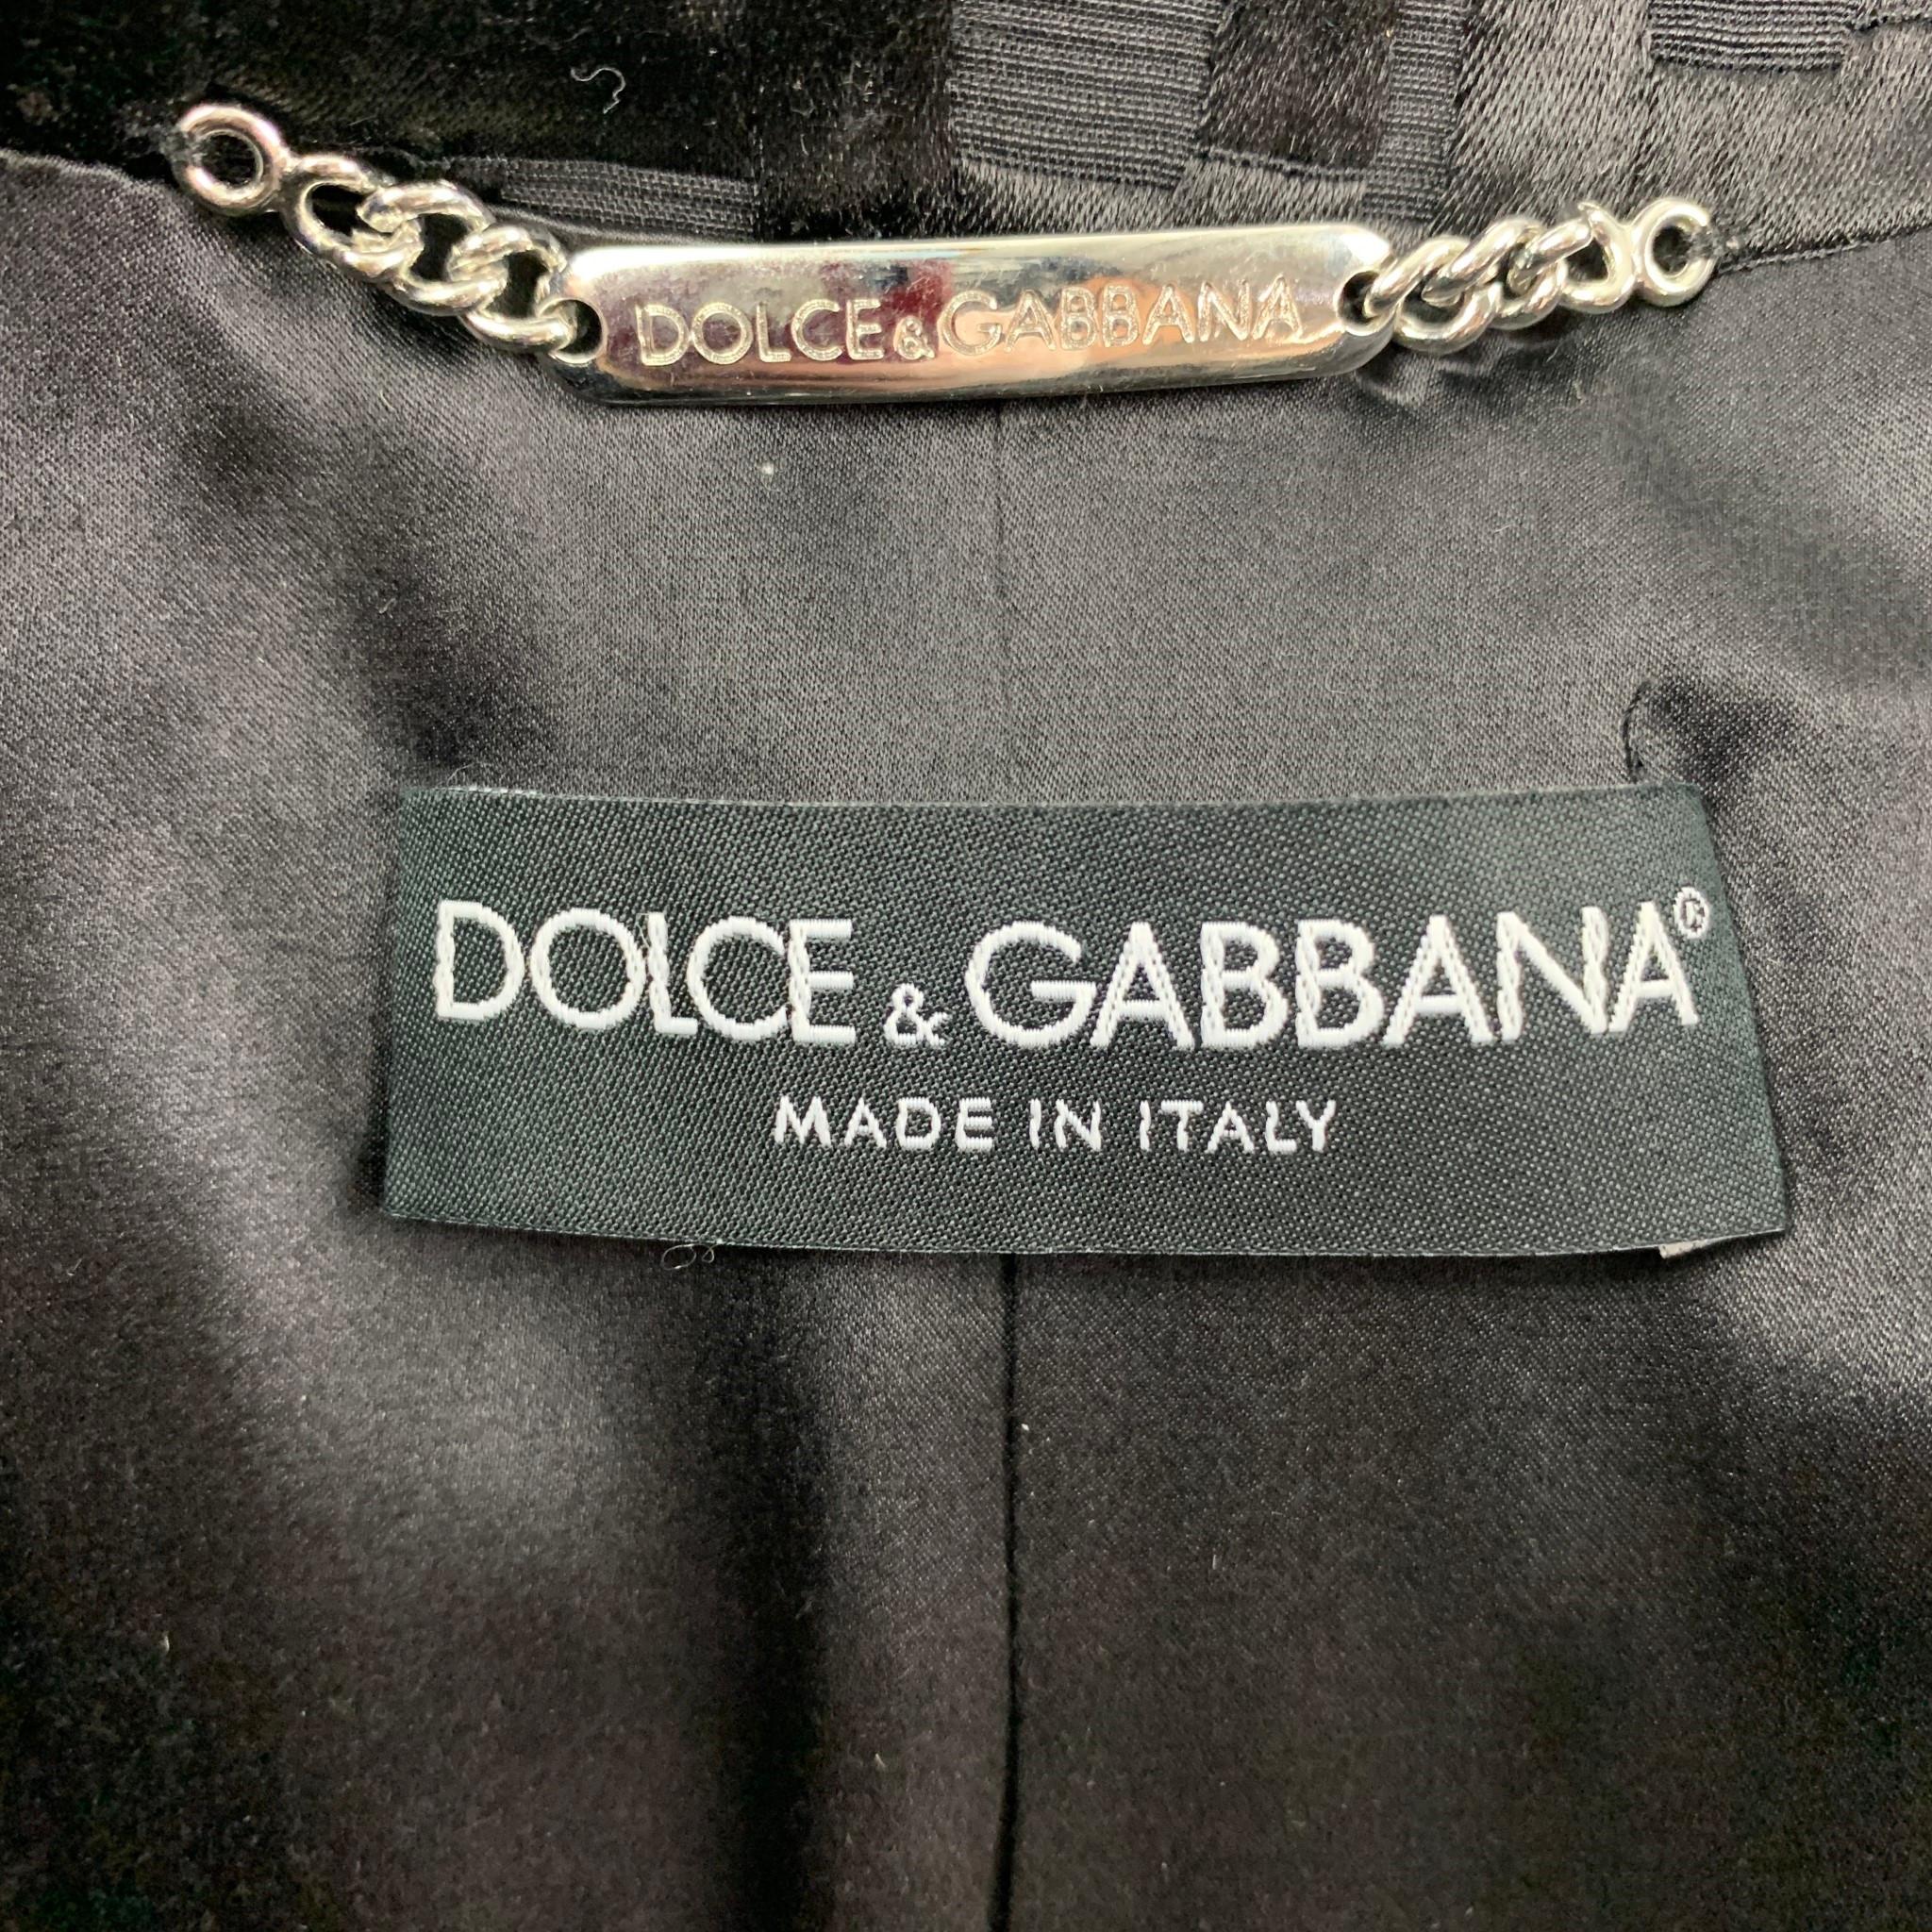 OLCE & GABBANA jacket comes in a black jacquard nylon / silk with a full liner featuring a peak lapel, buttoned details, flap pockets, and a double breasted closure. Made in Italy.

Very Good Pre-Owned Condition.
Marked: 40

Measurements:

Shoulder: